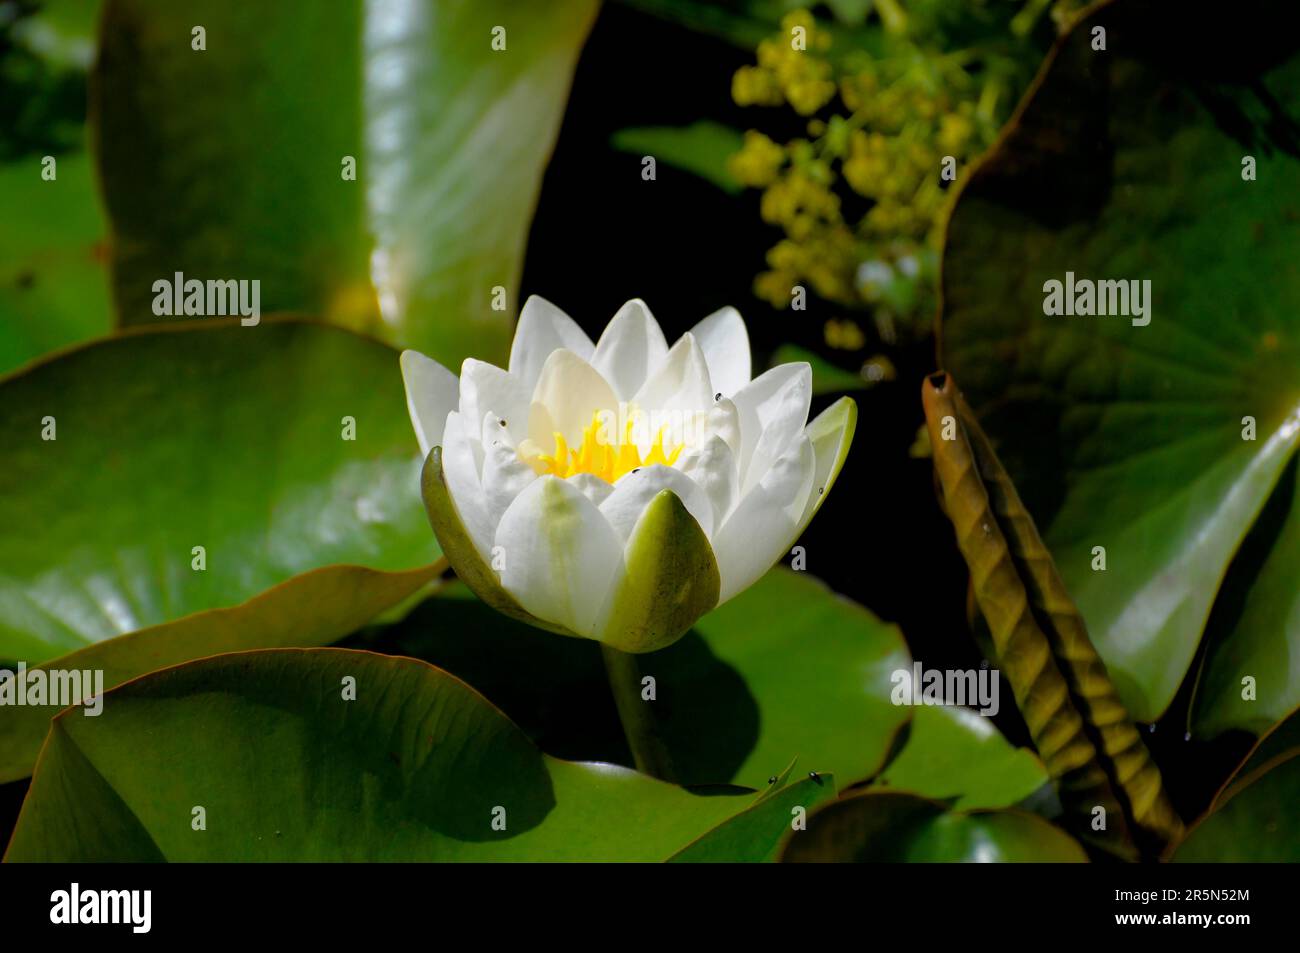 White water lilies in the garden pond Stock Photo